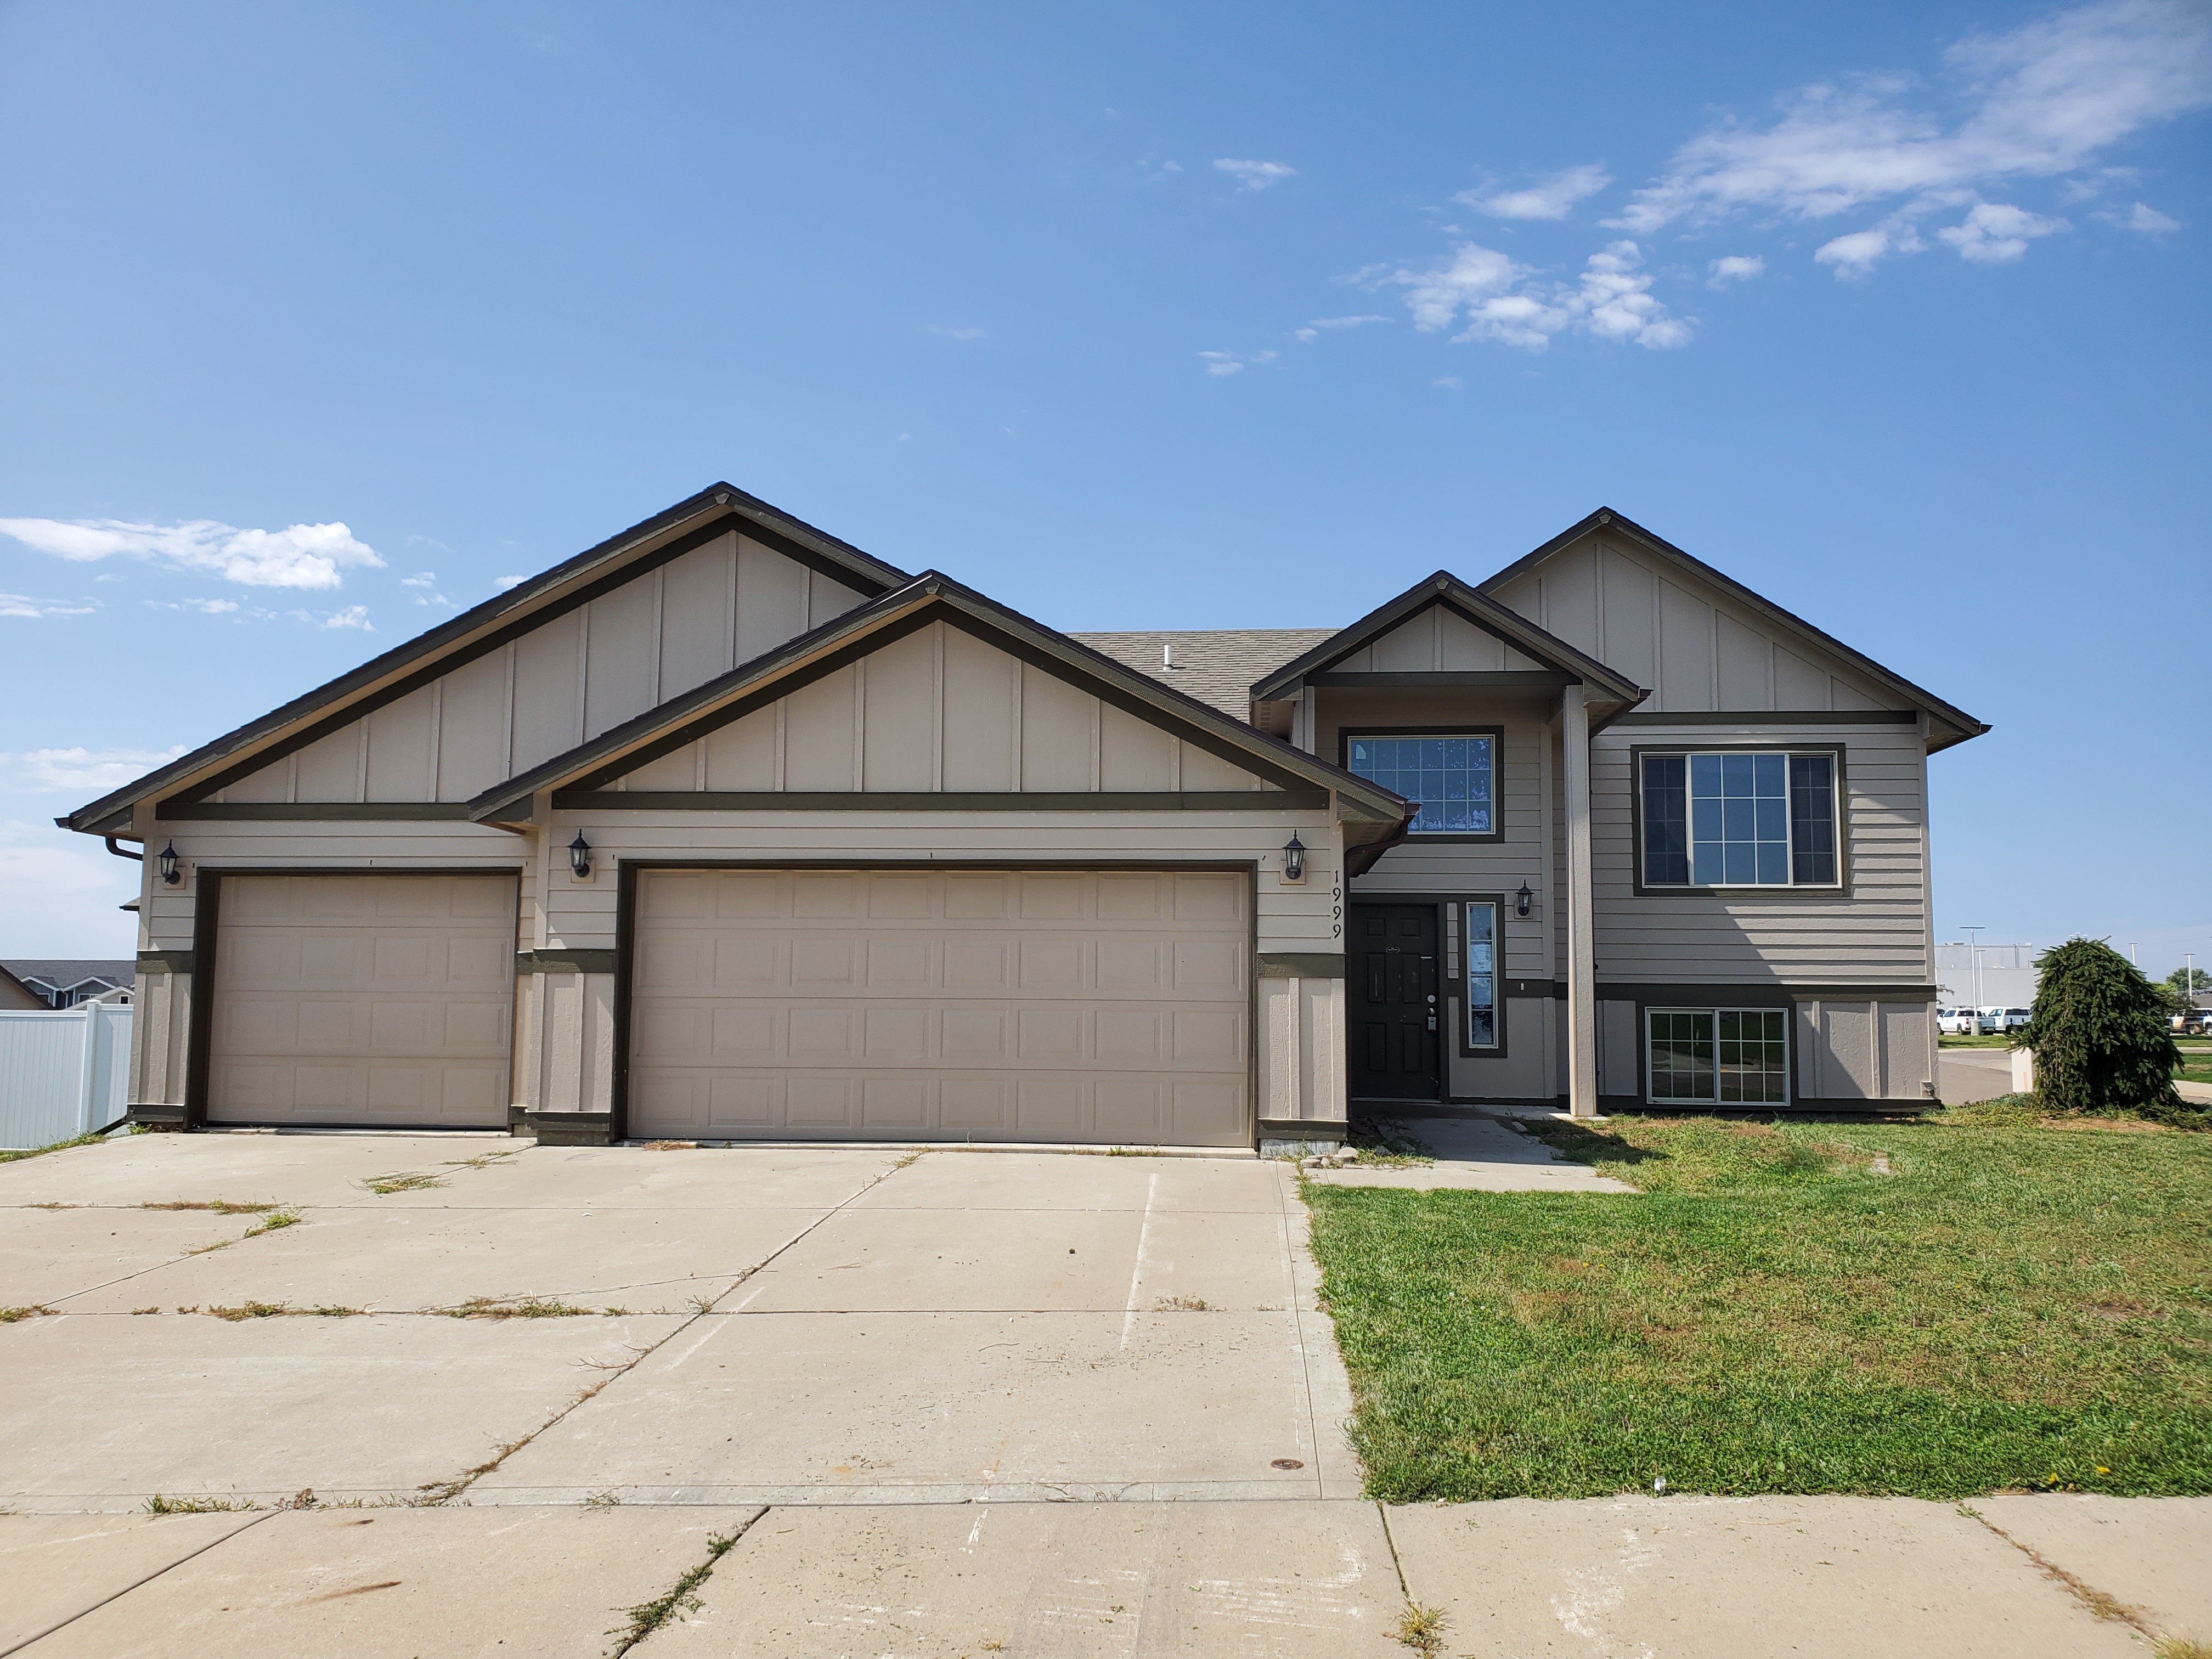 1999 2nd Ave E Dickinson, ND 58601